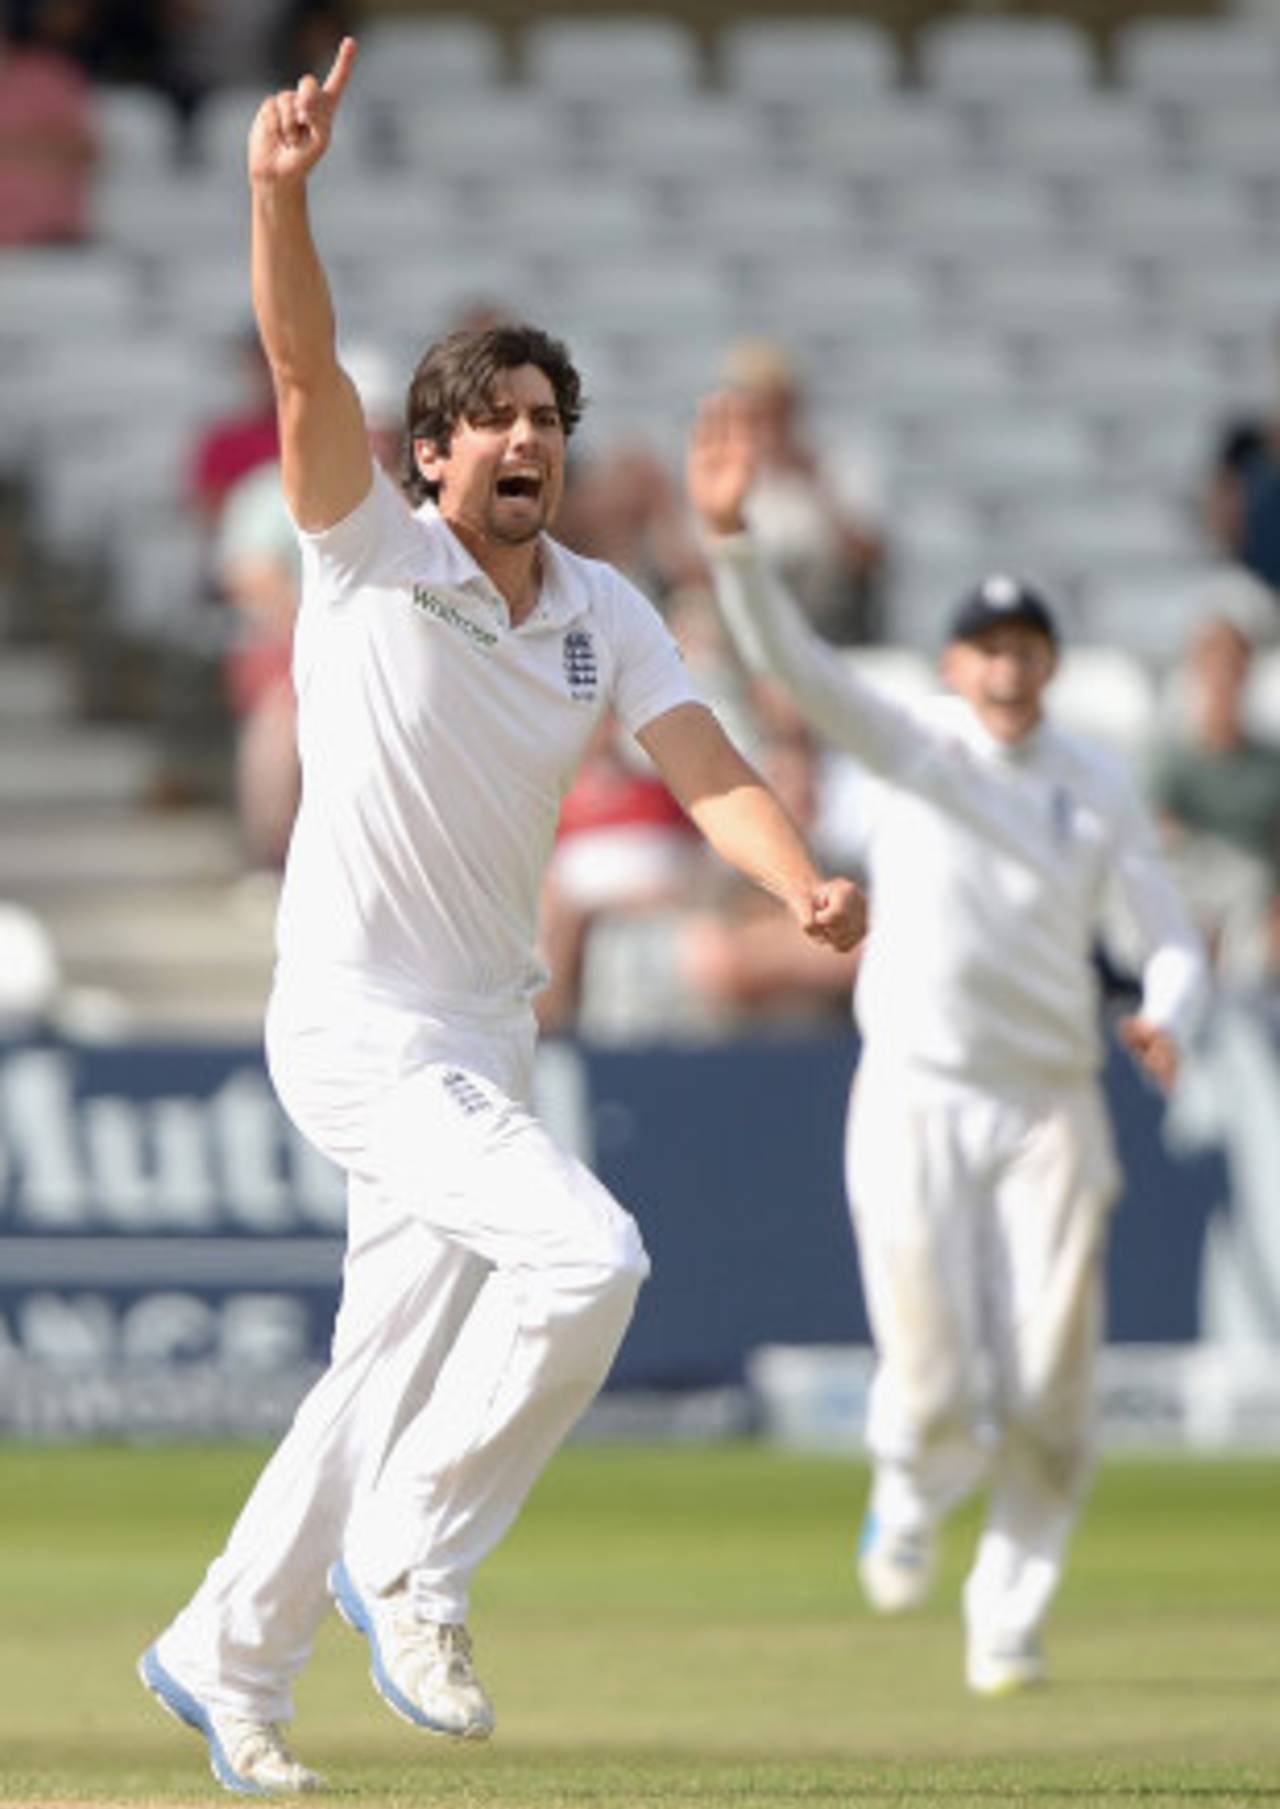 Alastair Cook cannot believe his luck as he picks up a wicket, England v India, 1st Investec Test, Trent Bridge, 5th day, July 13, 2014